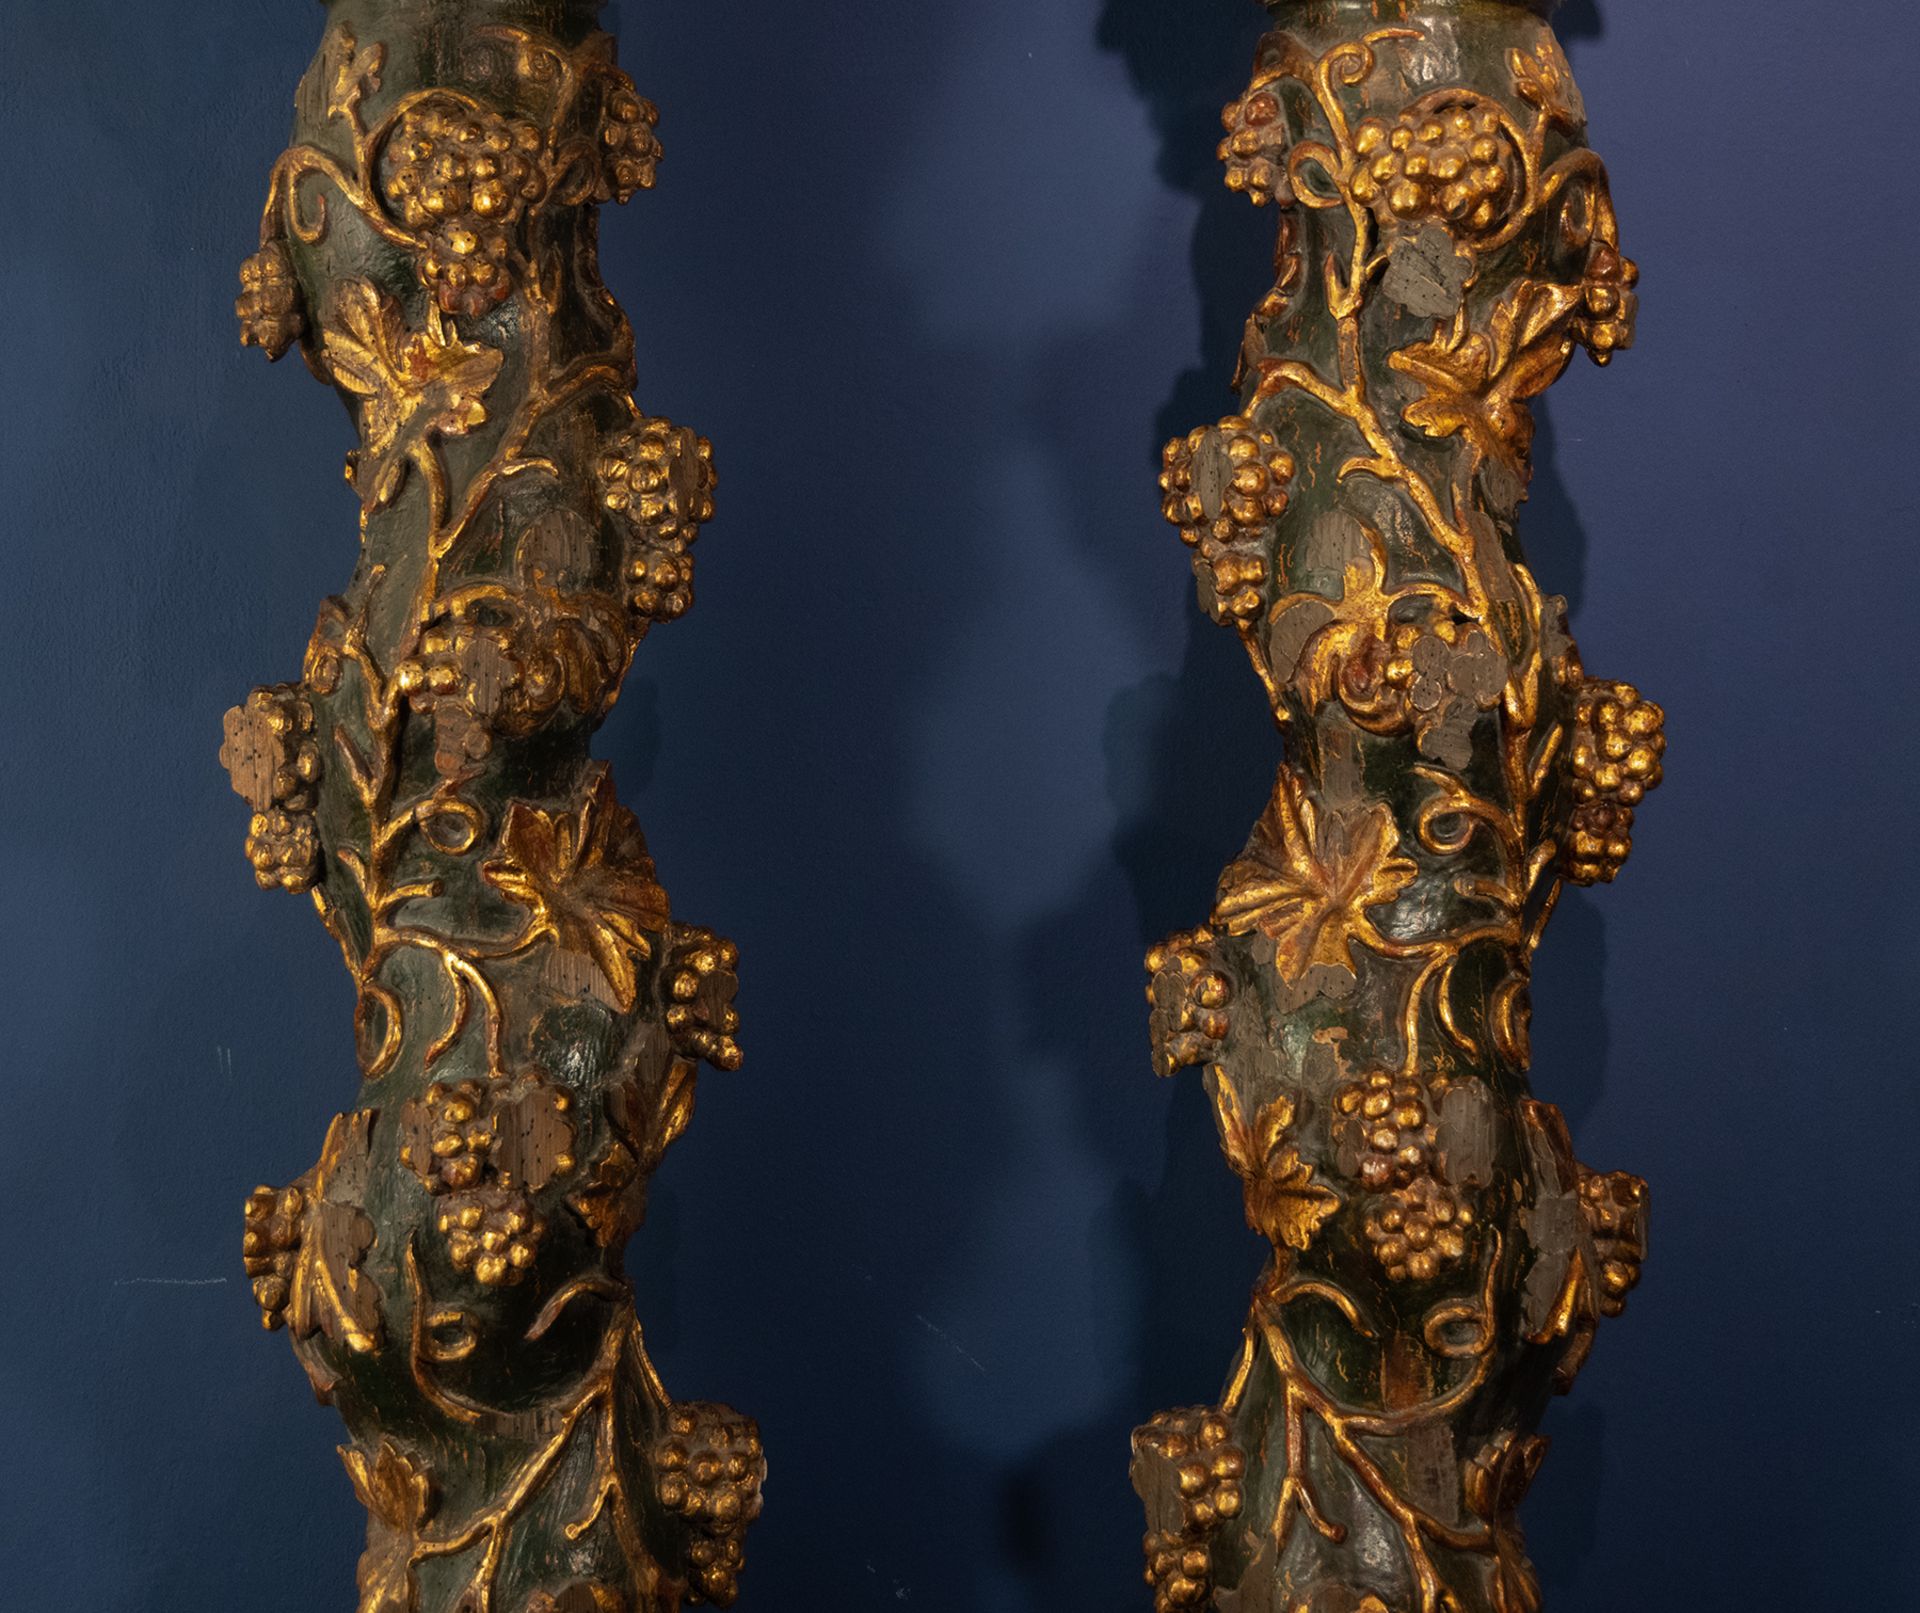 Pair of Large Solomonic Columns, 17th century, in carved, polychromed and gilt wood - Image 3 of 4